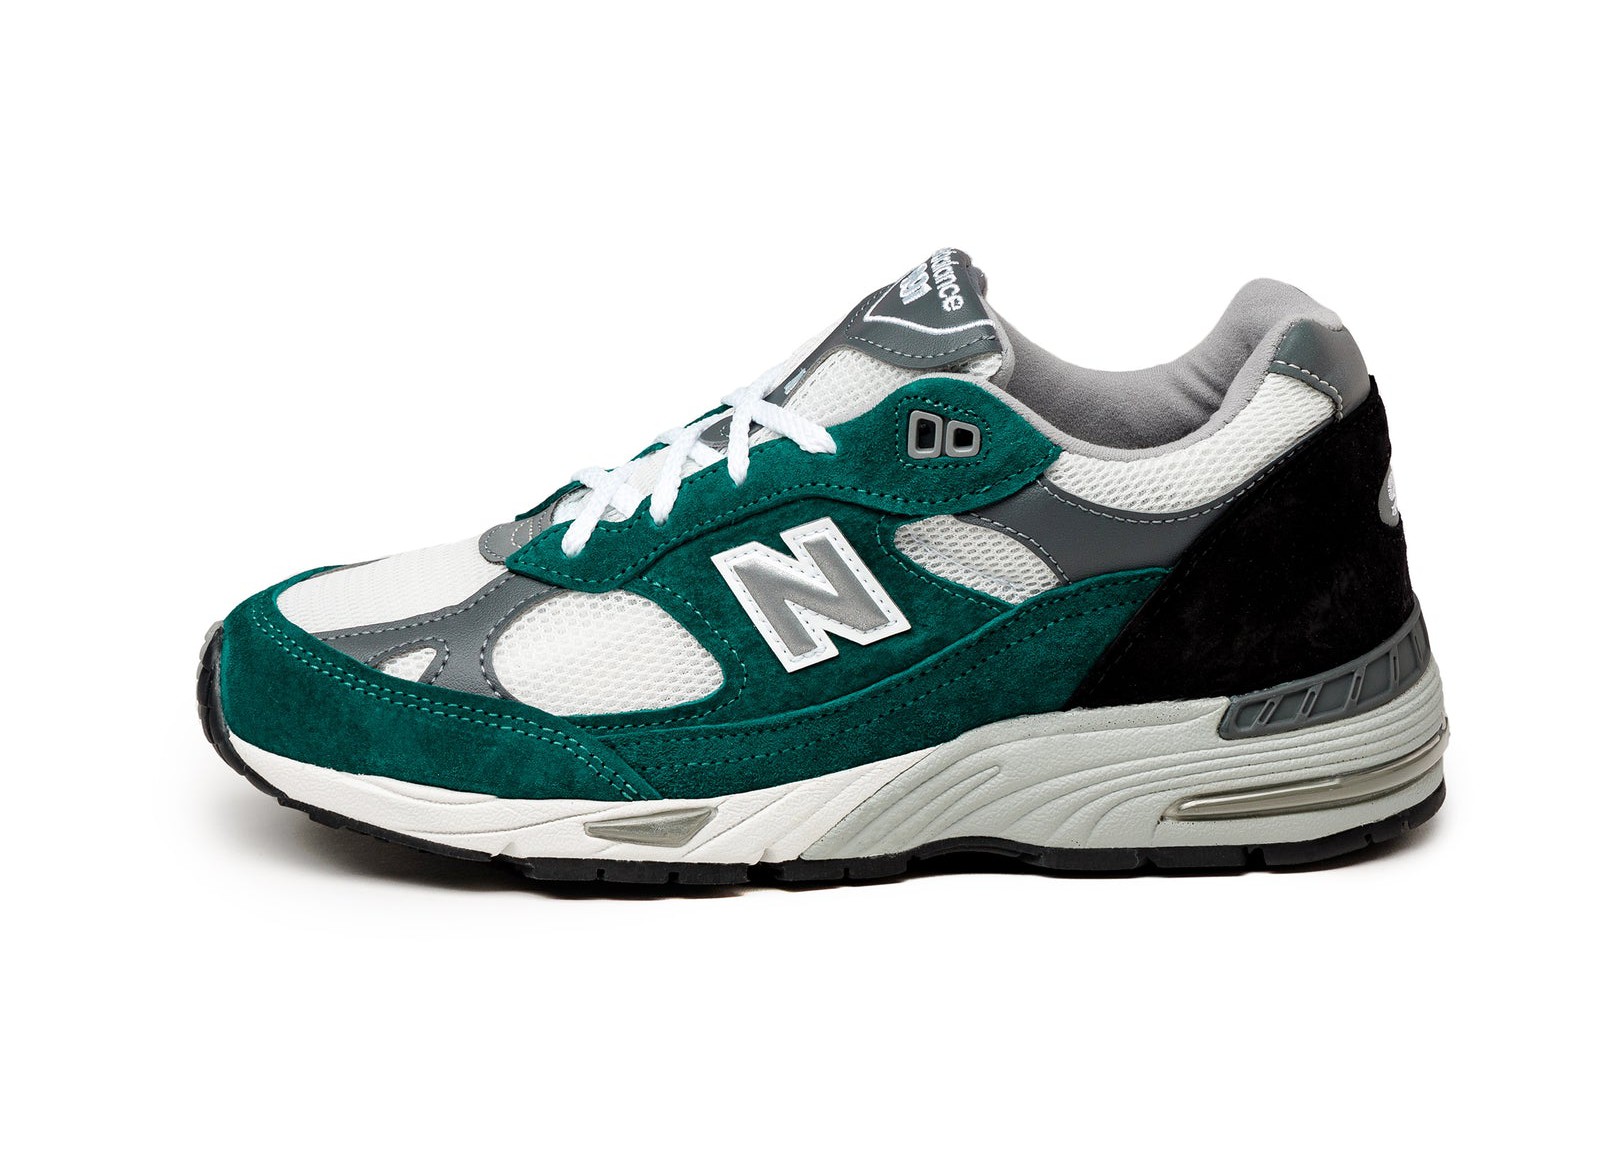 New Balance W991TLK
Made in England
Pacific / Alloy